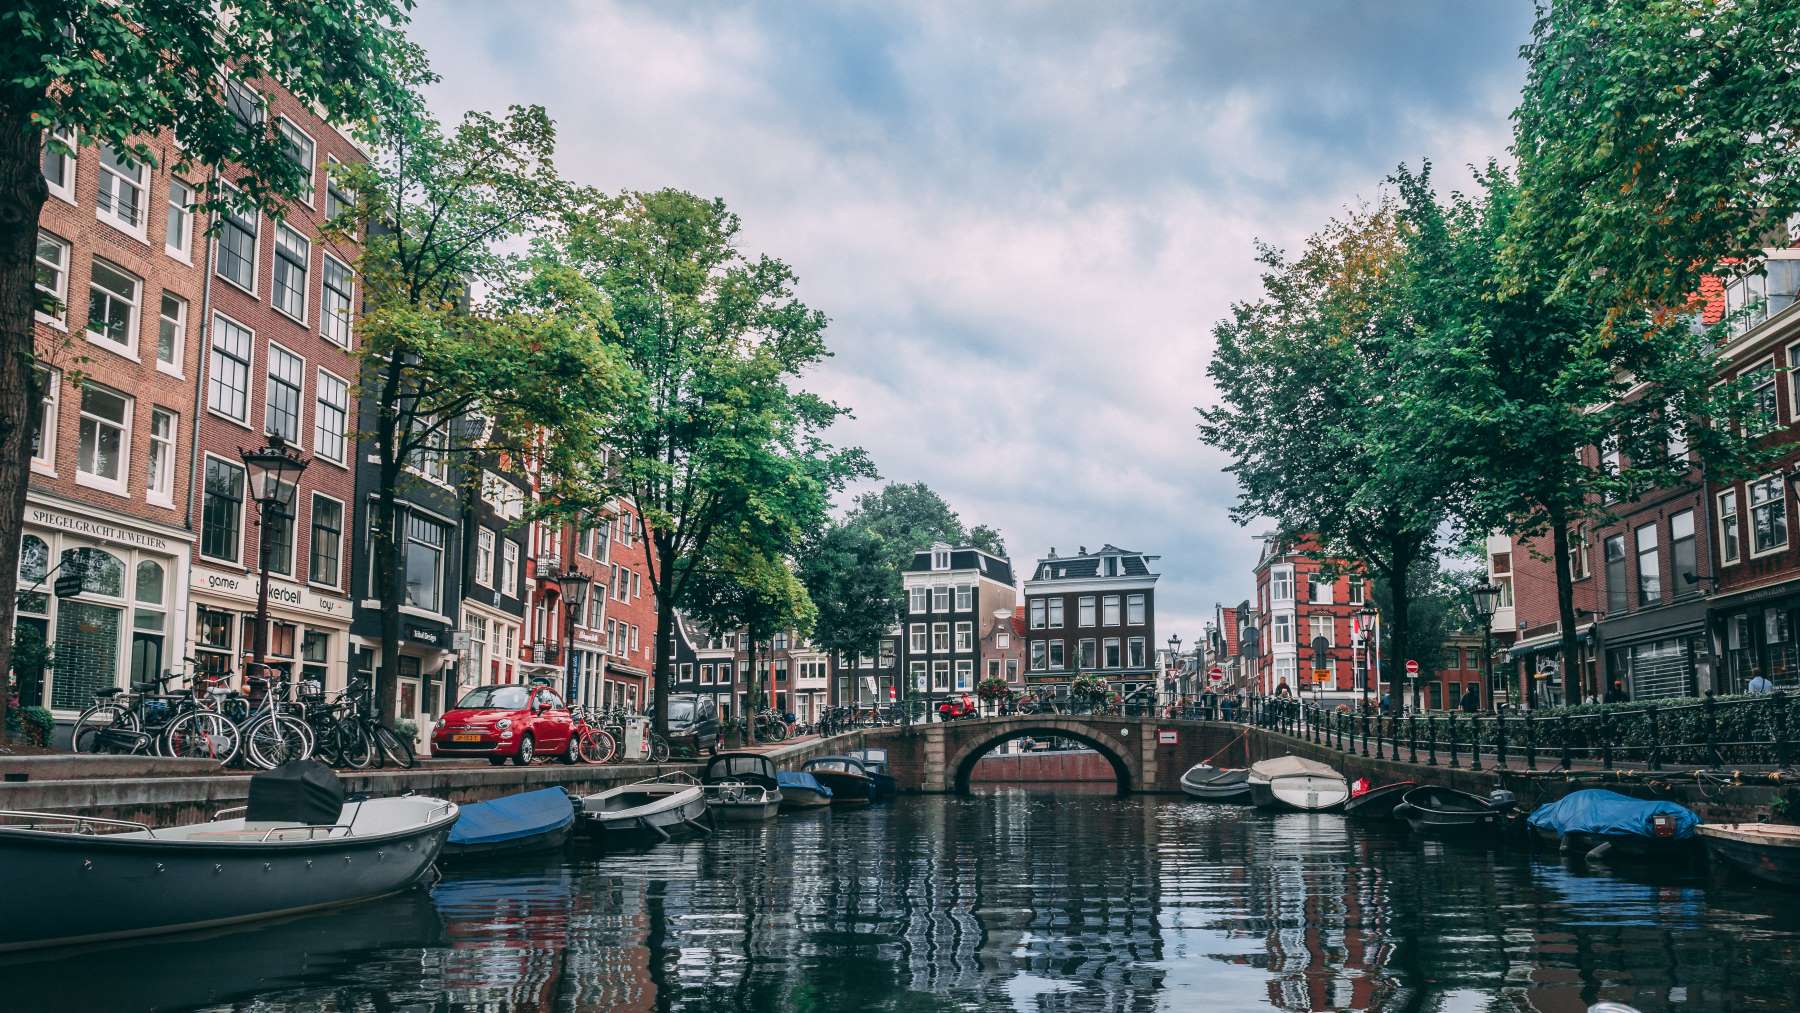 Best Things to Do in Amsterdam - Endless Travel Destinations